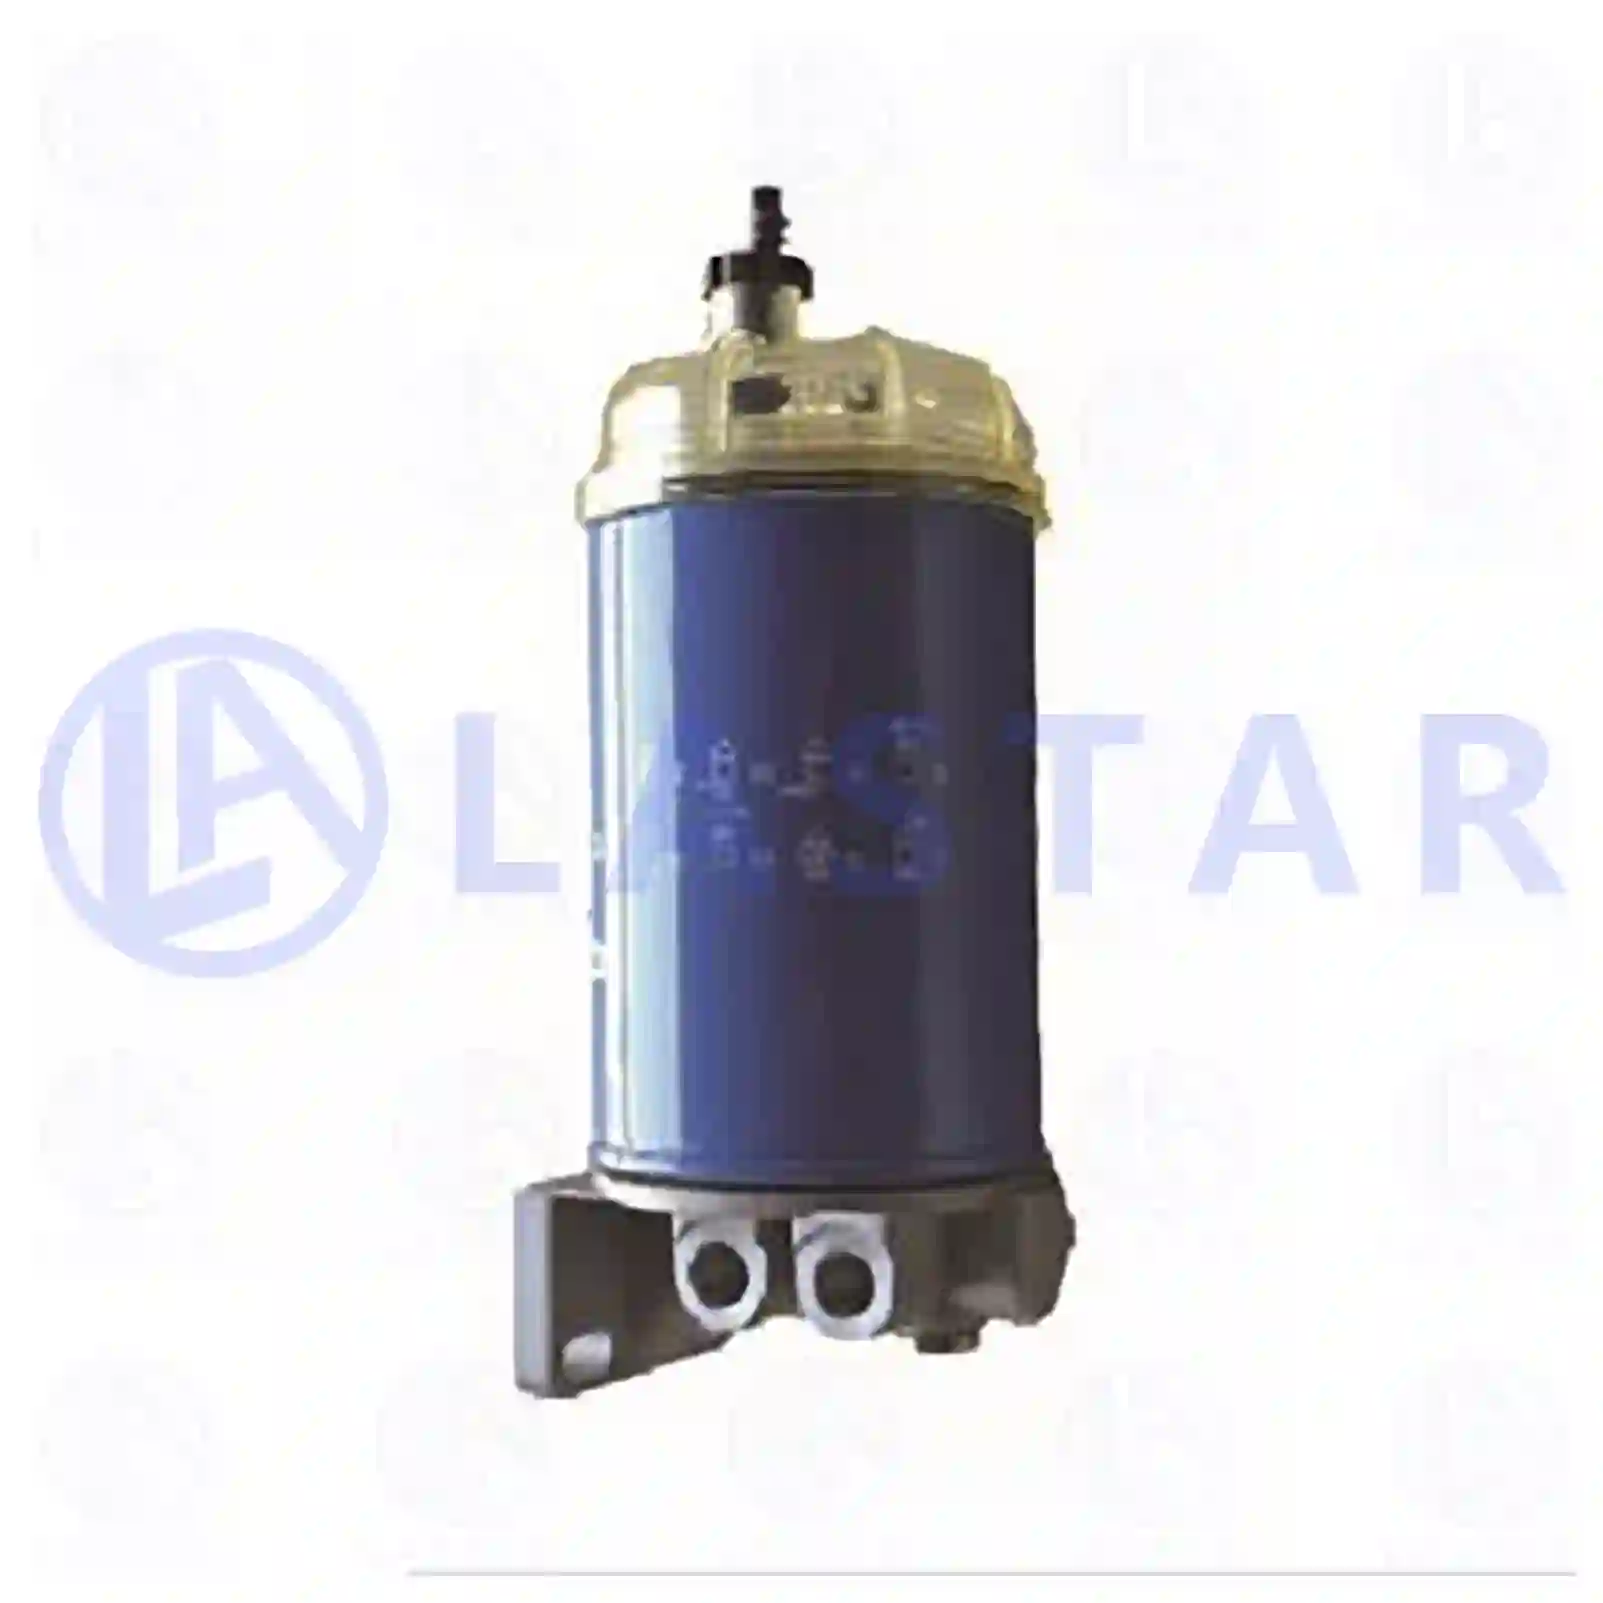 Fuel filter, complete, 77724530, 1393639, , , ||  77724530 Lastar Spare Part | Truck Spare Parts, Auotomotive Spare Parts Fuel filter, complete, 77724530, 1393639, , , ||  77724530 Lastar Spare Part | Truck Spare Parts, Auotomotive Spare Parts